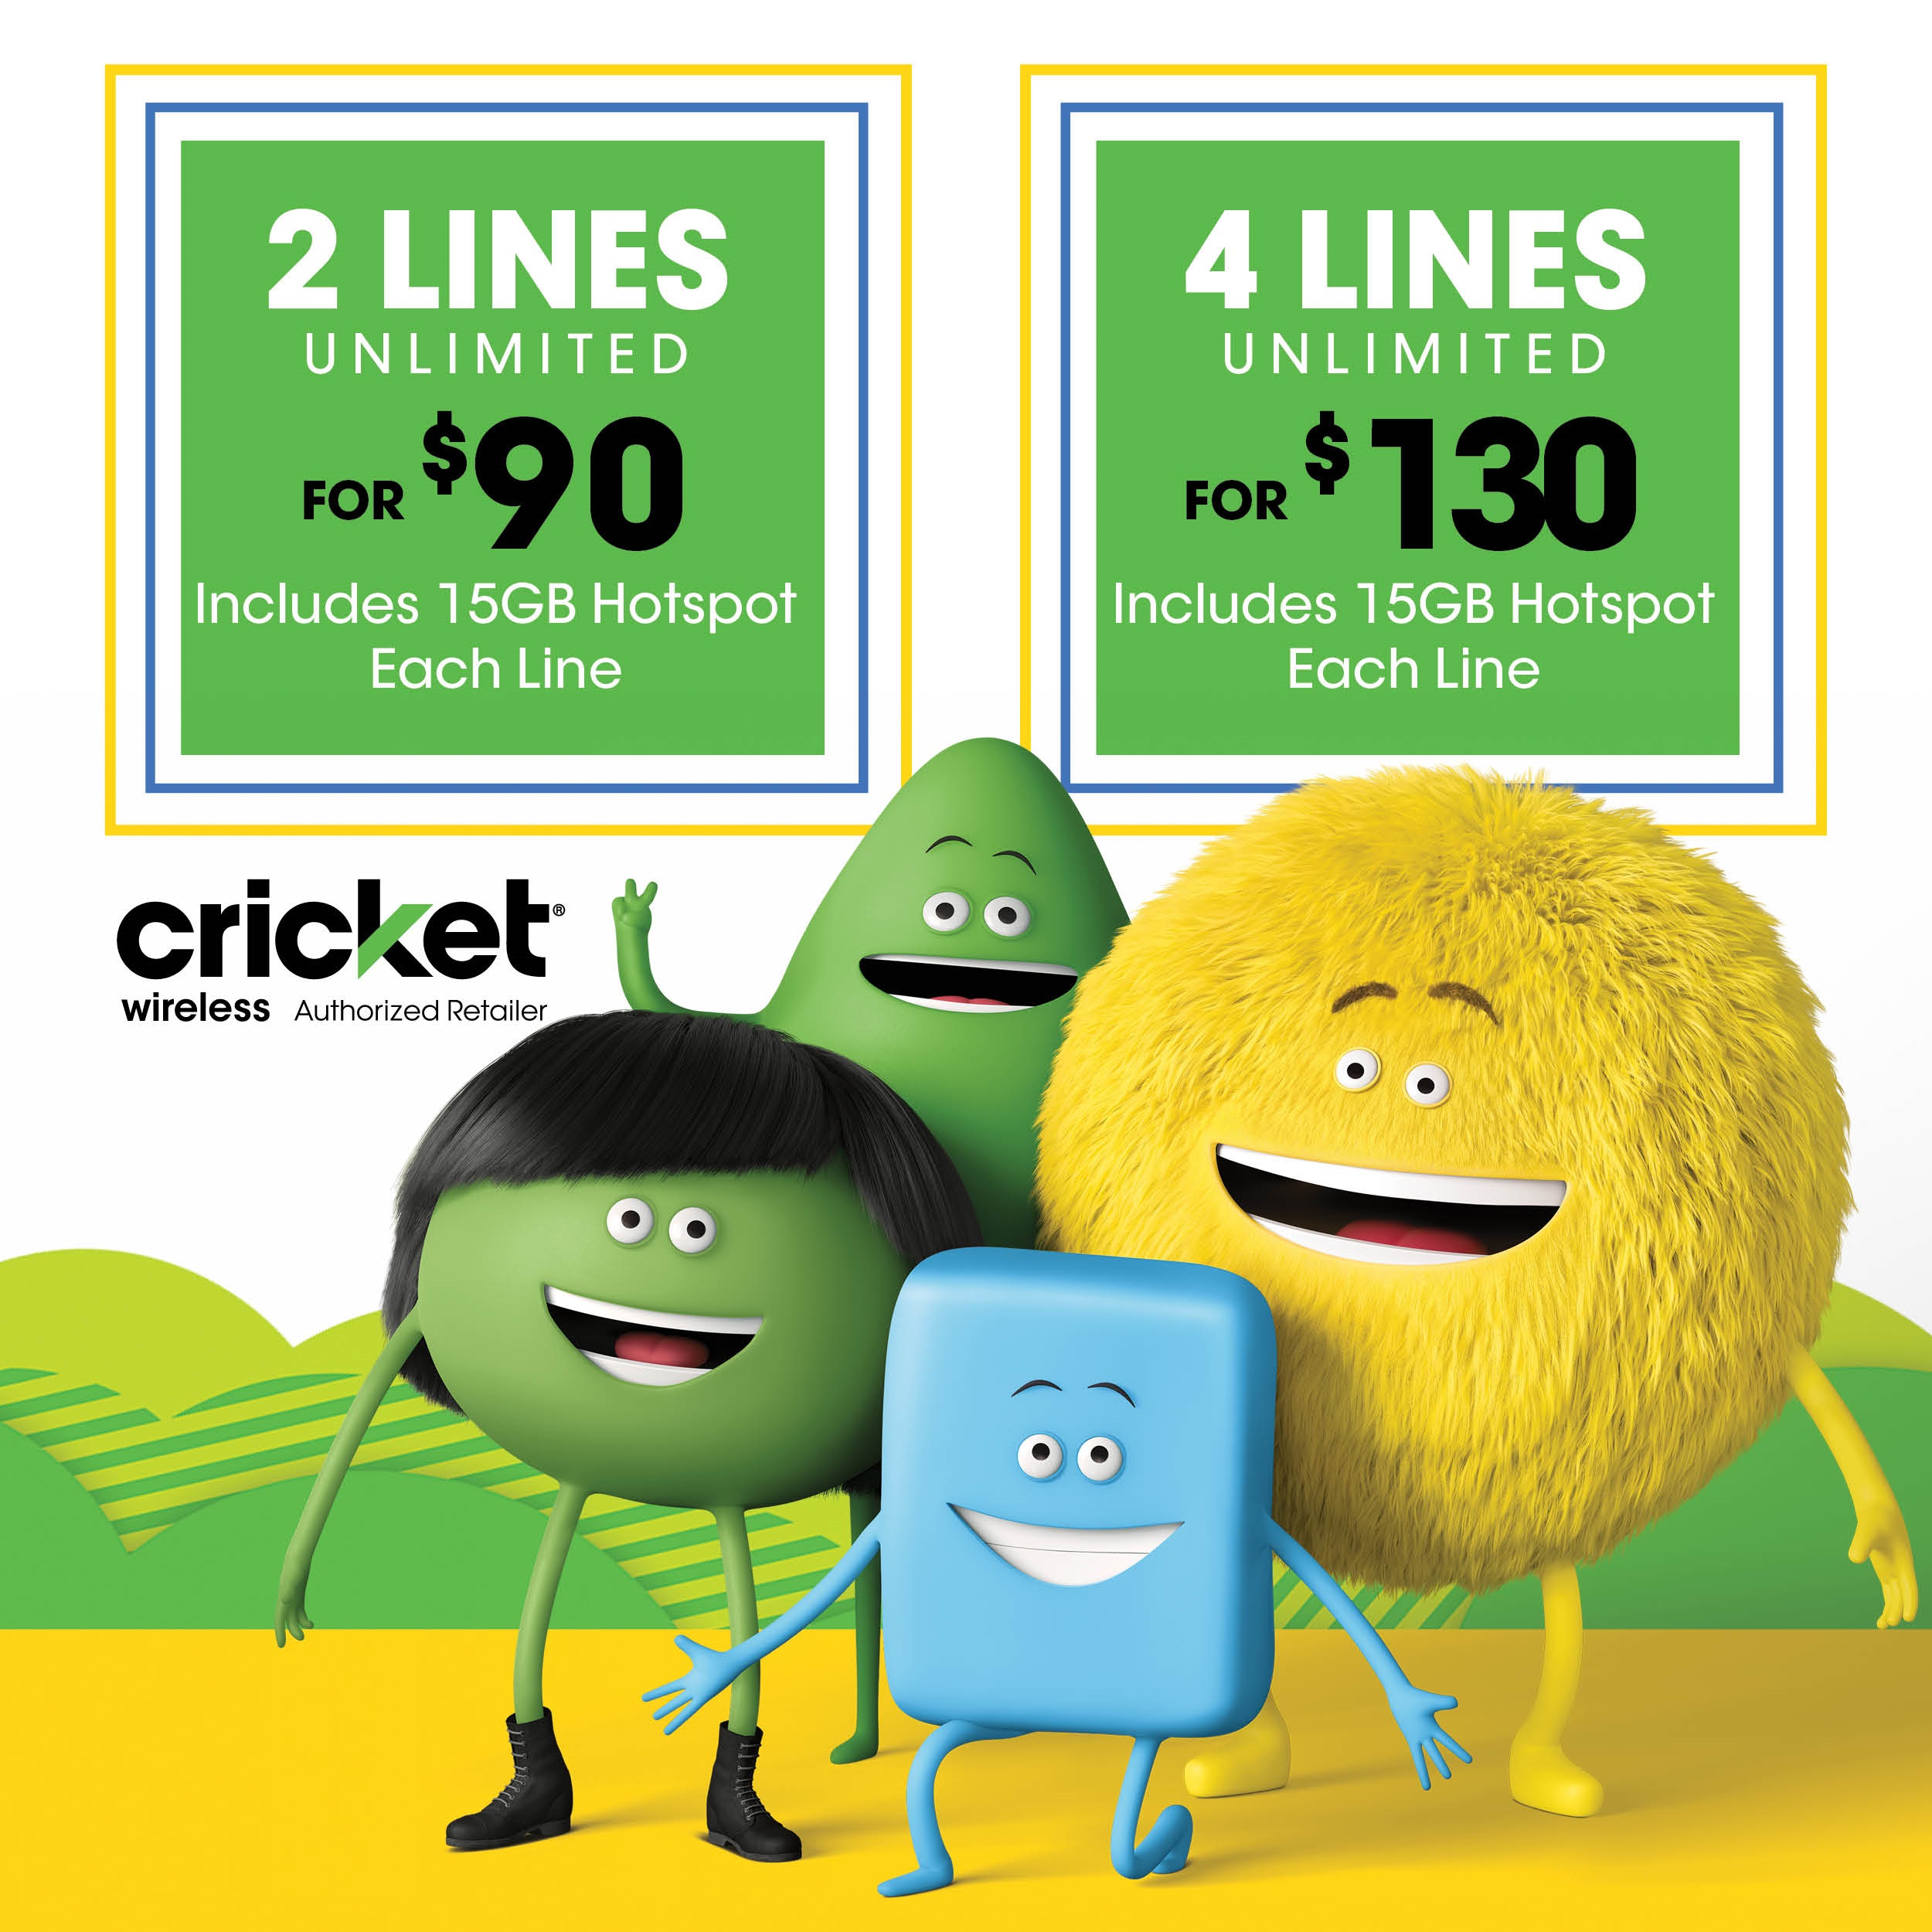 cricket wirerless quick pay